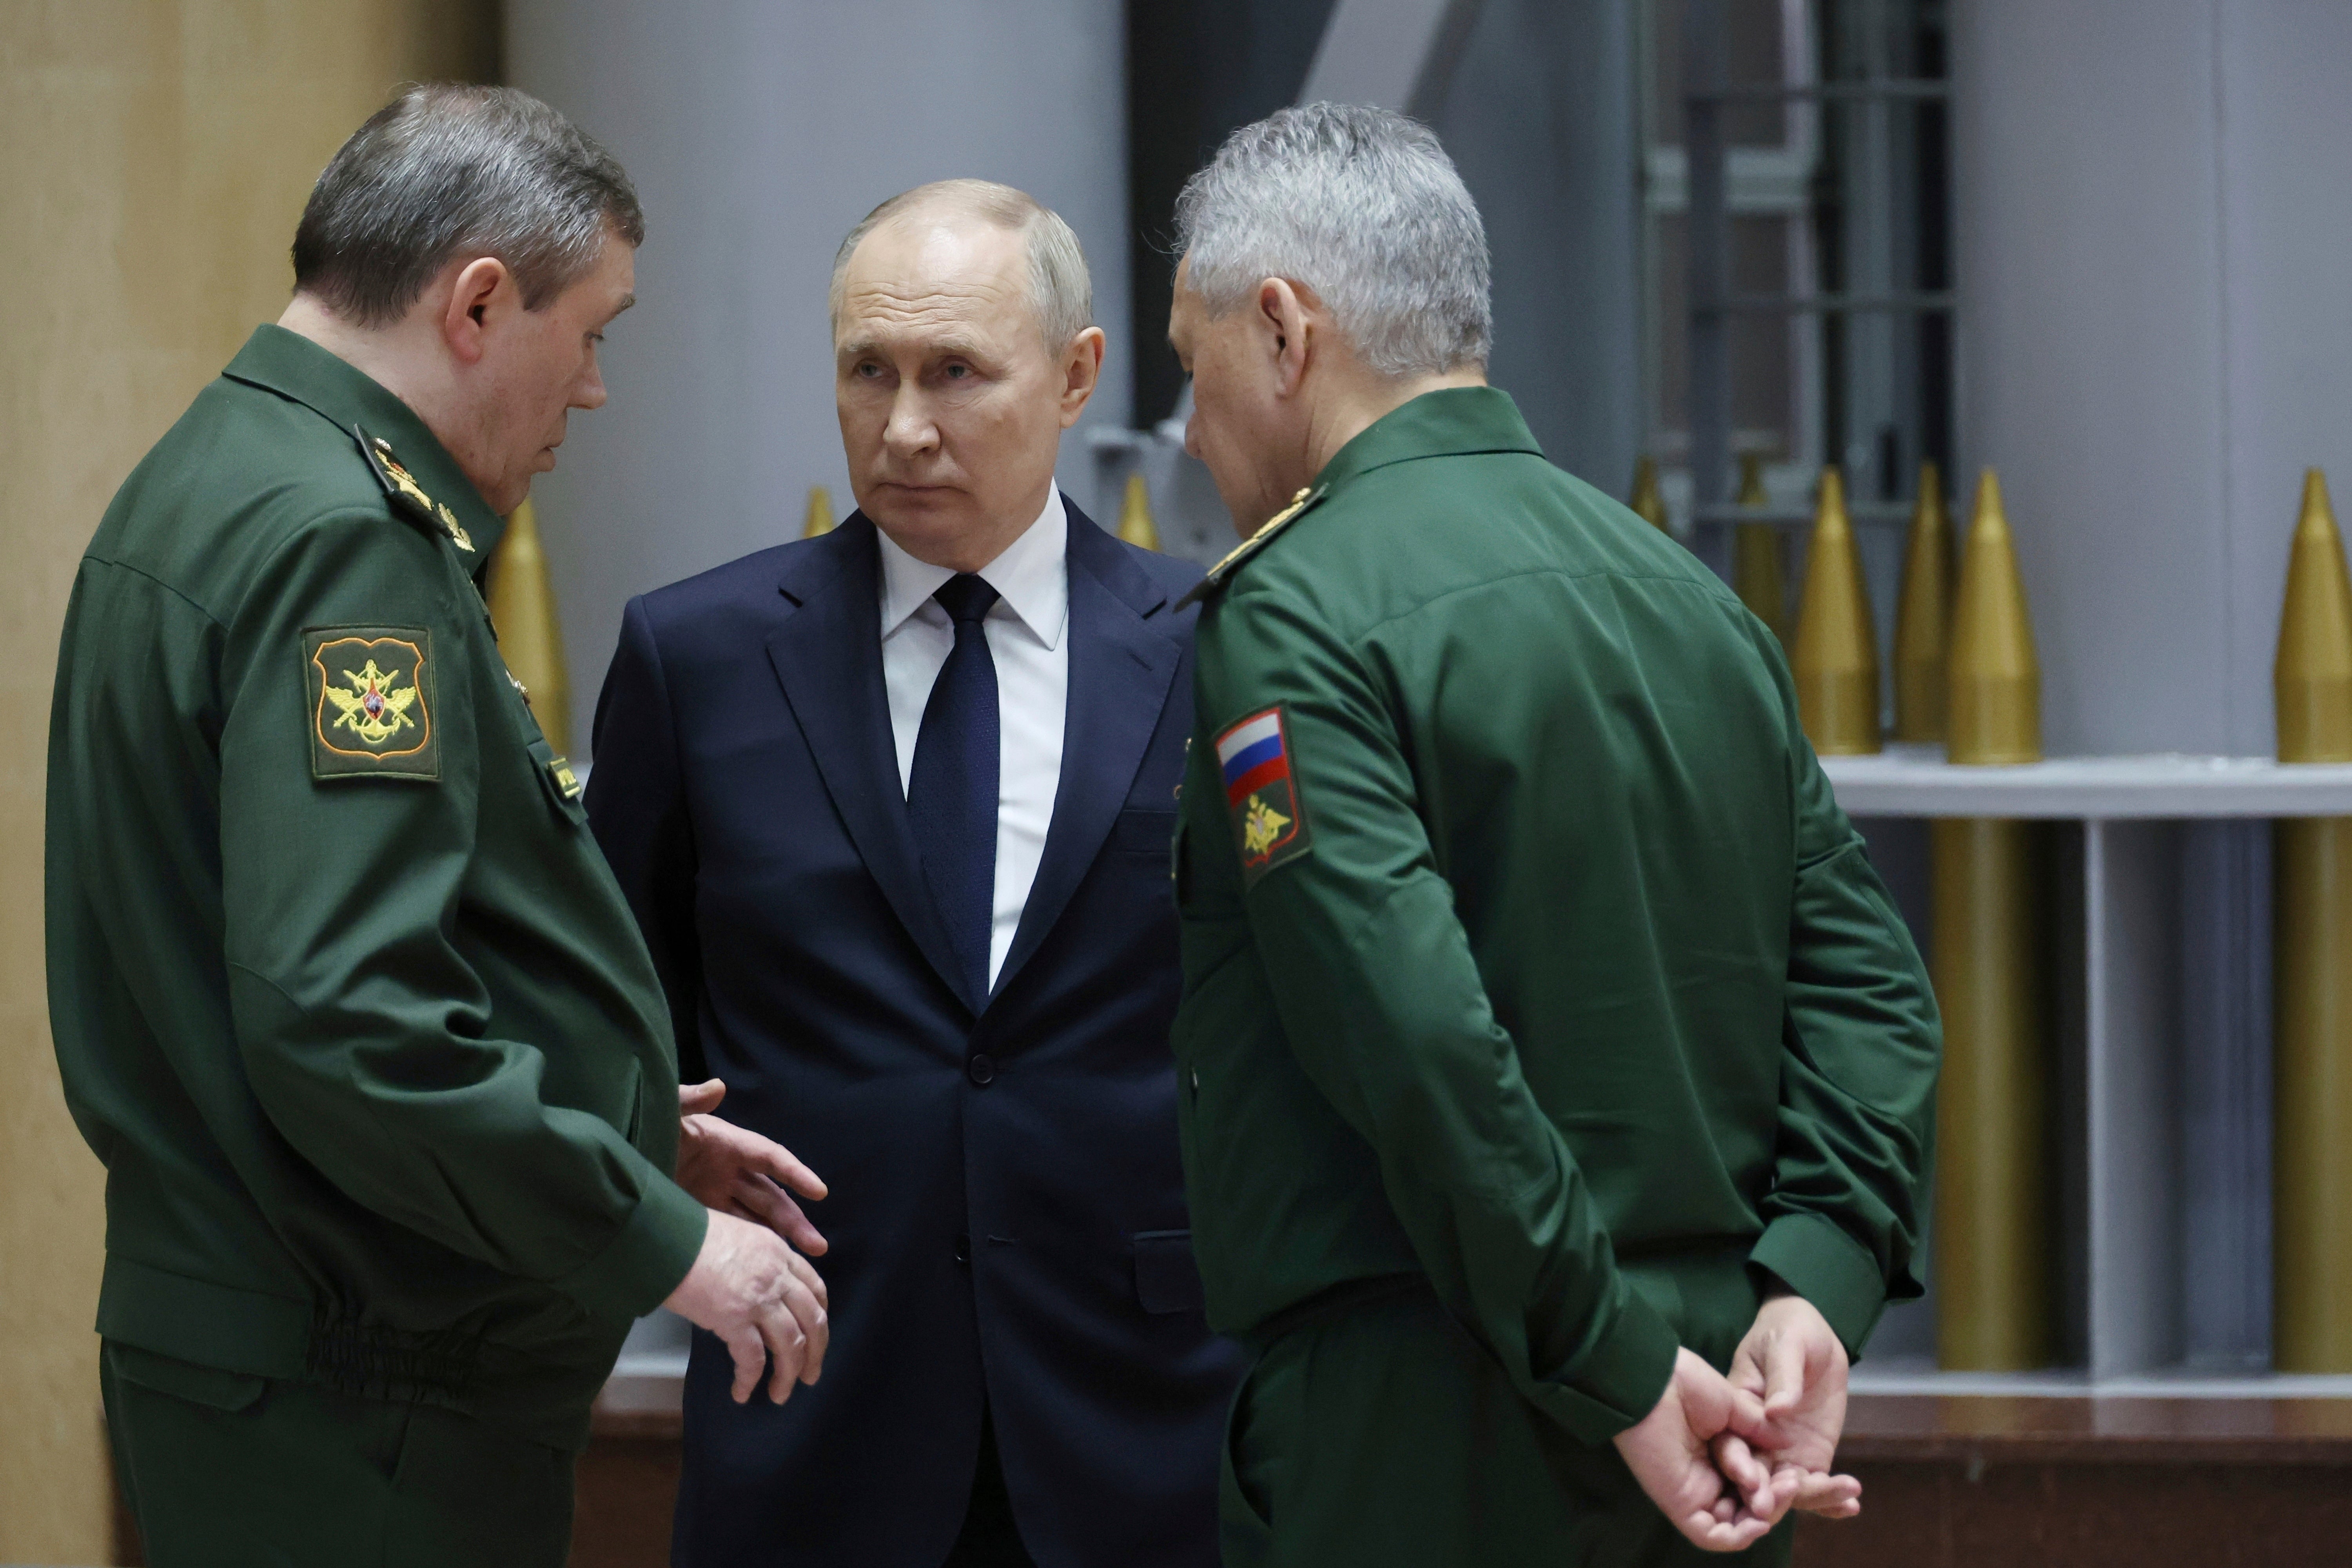 Russian President Vladimir Putin (center) talks with General Valery Gerasimov (left), Chief of the General Staff, and then-Defense Minister Sergei Shoigu after a meeting in Moscow, Russia.